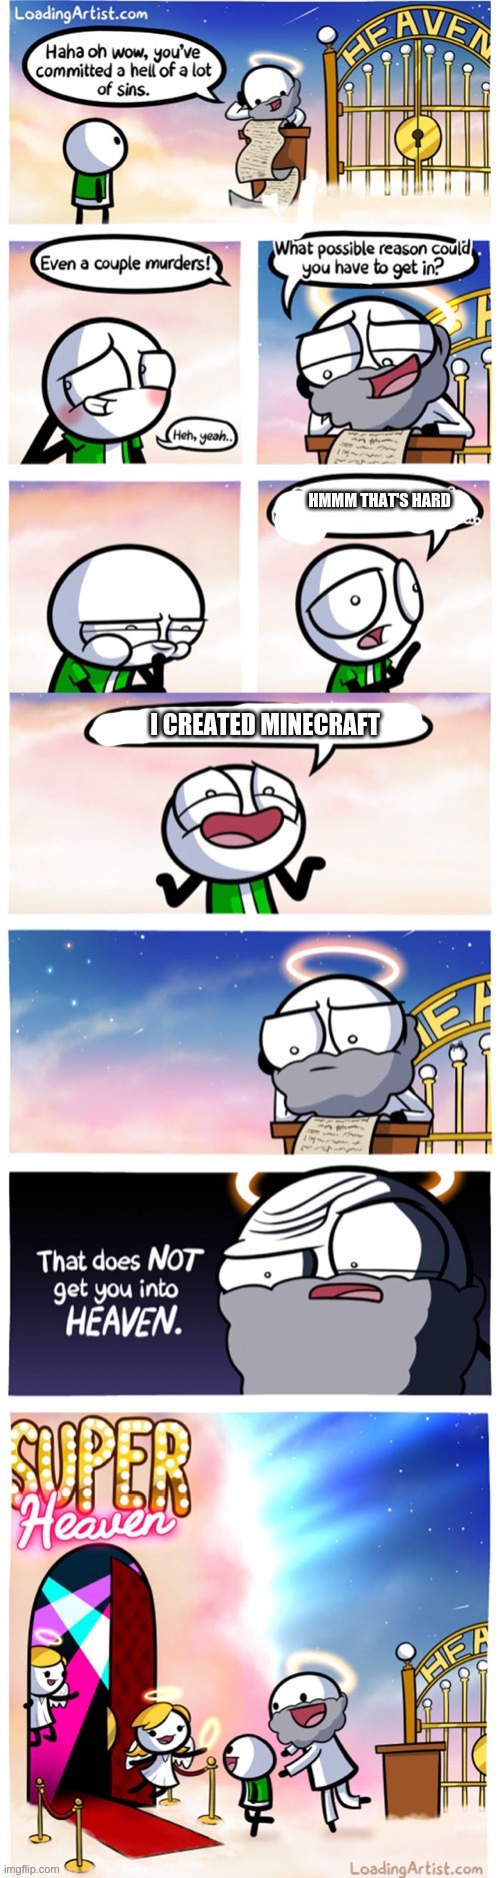 Notch in heaven be like | HMMM THAT'S HARD; I CREATED MINECRAFT | image tagged in super heaven,minecraft,notch,bad notch,memes,yay | made w/ Imgflip meme maker